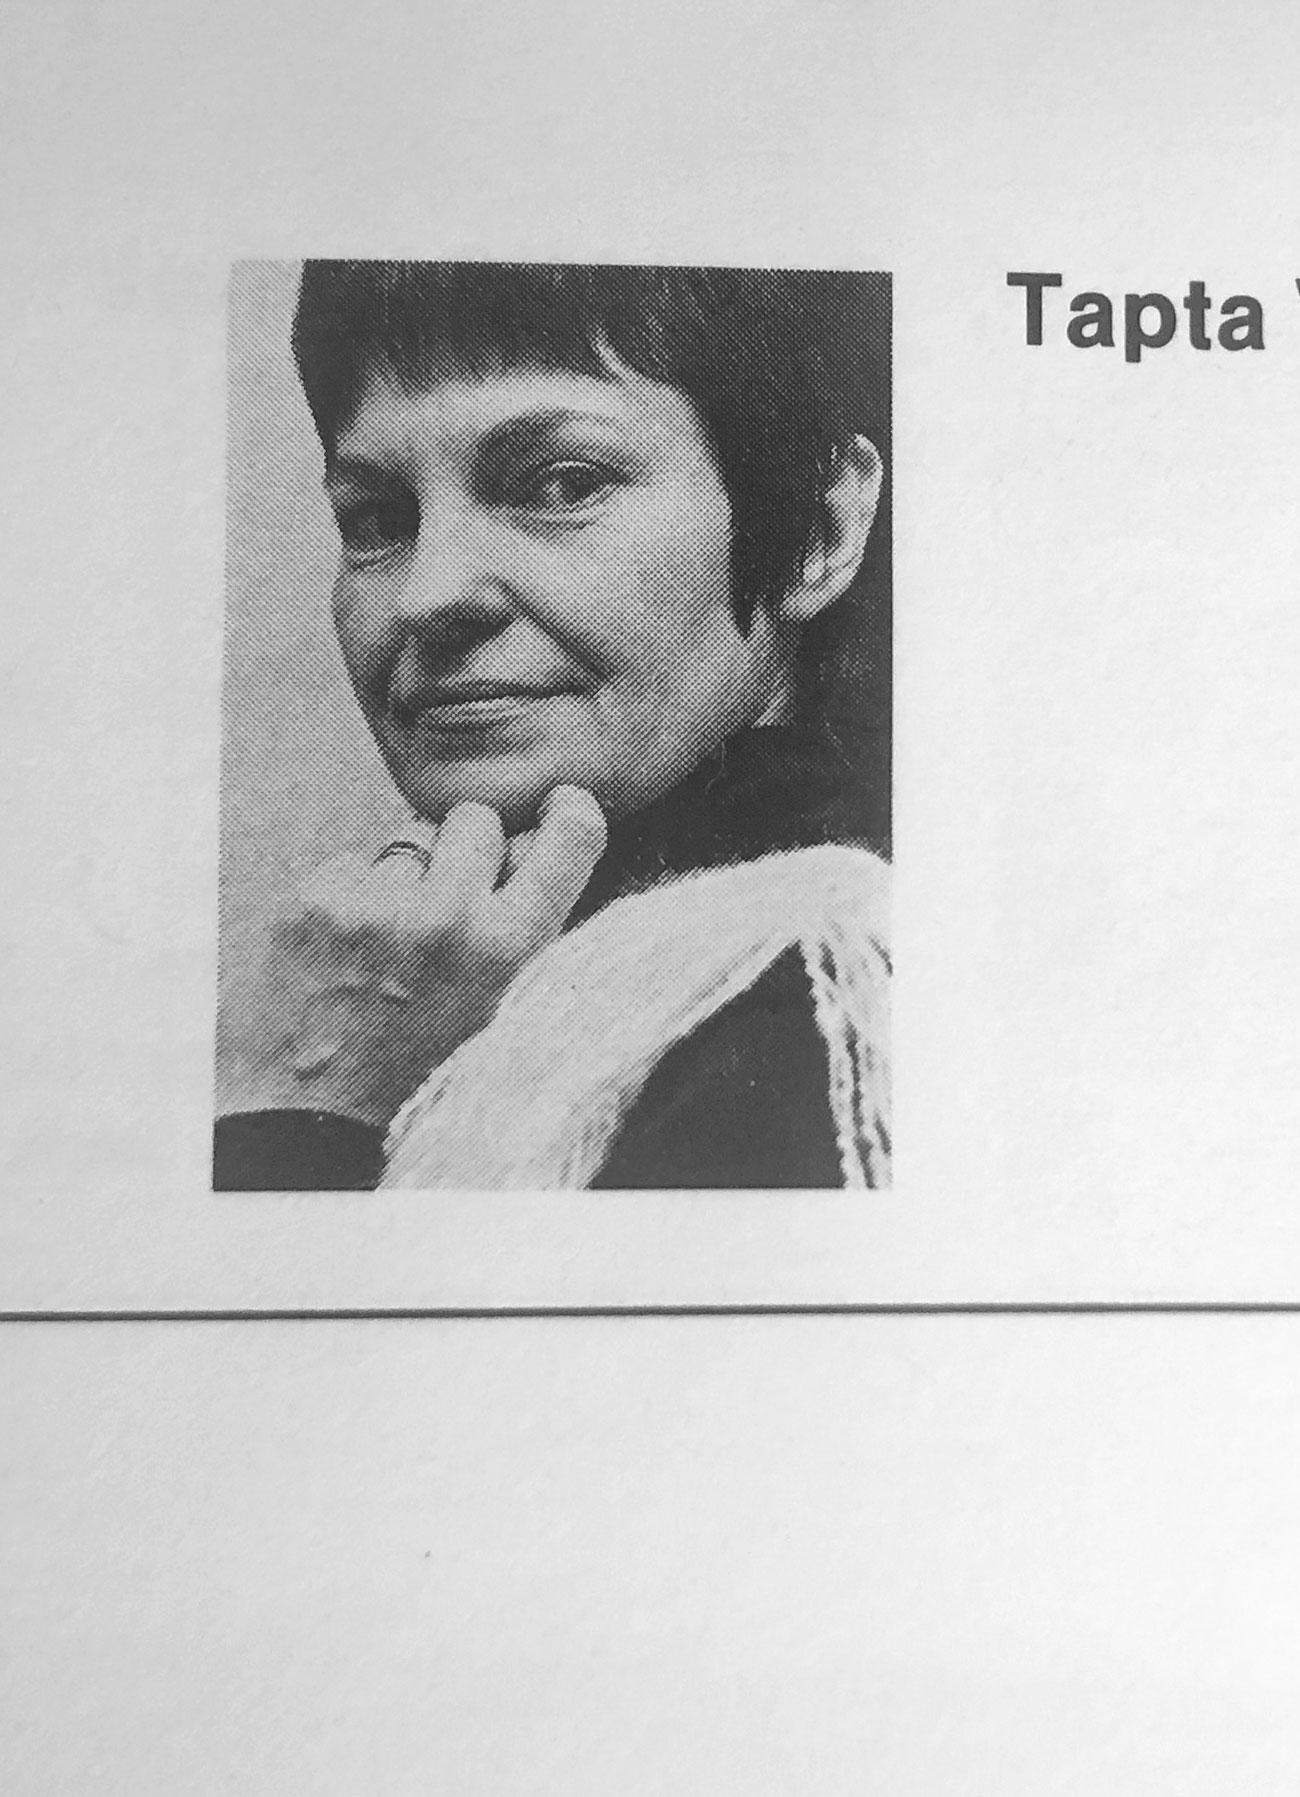 Tapta 1973 Tapestry Wall Artimage 8